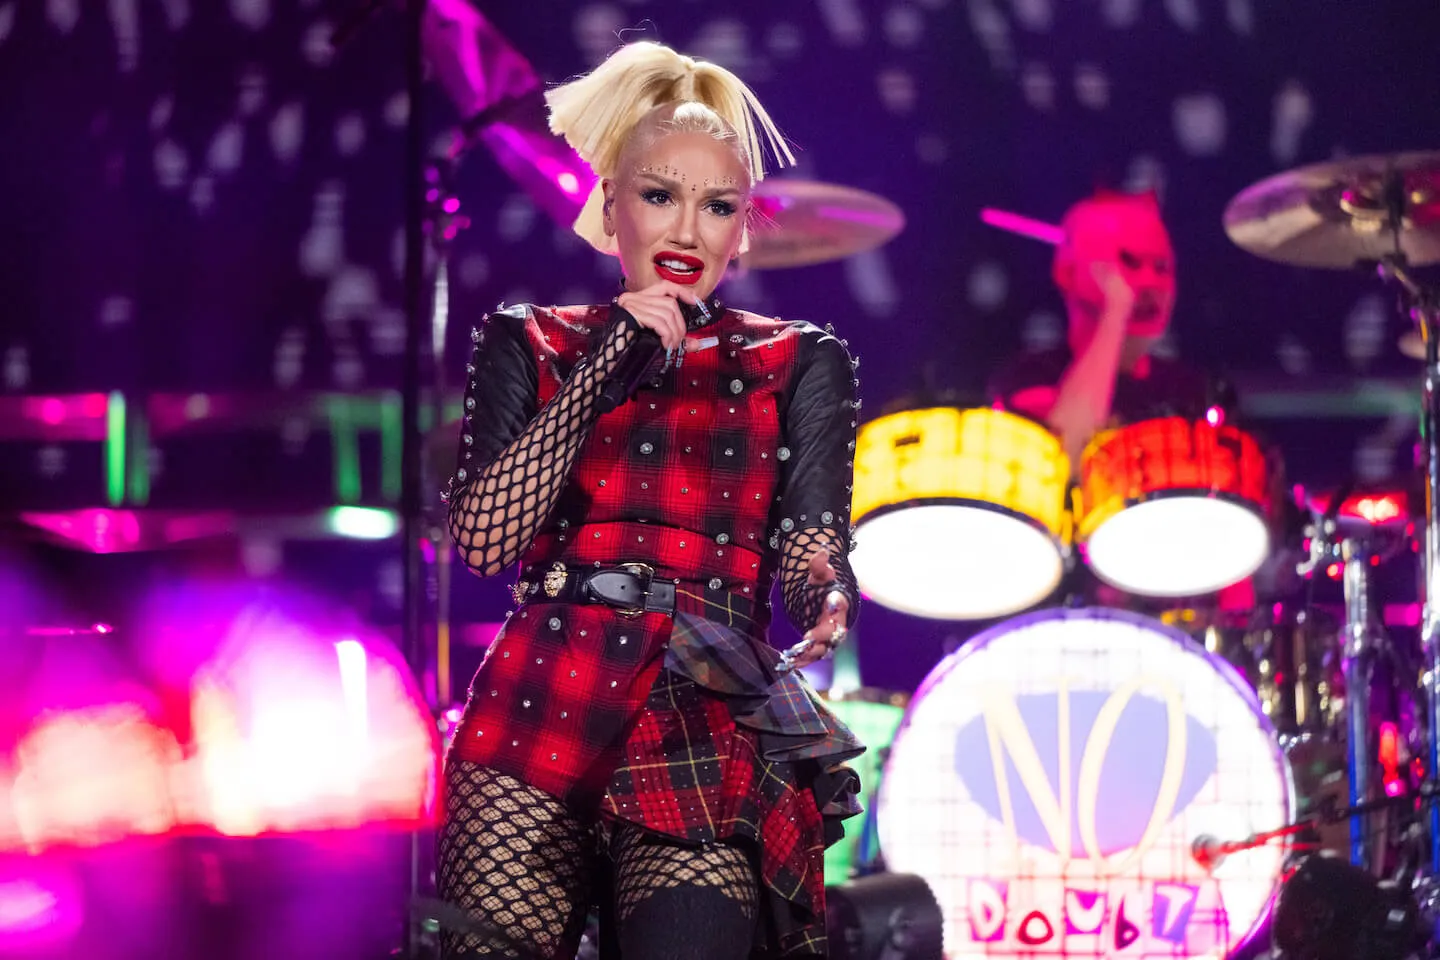 Gwen Stefani on stage in a red and black plaid outfit with the No Doubt drummer in the background at Coachella in April 2024